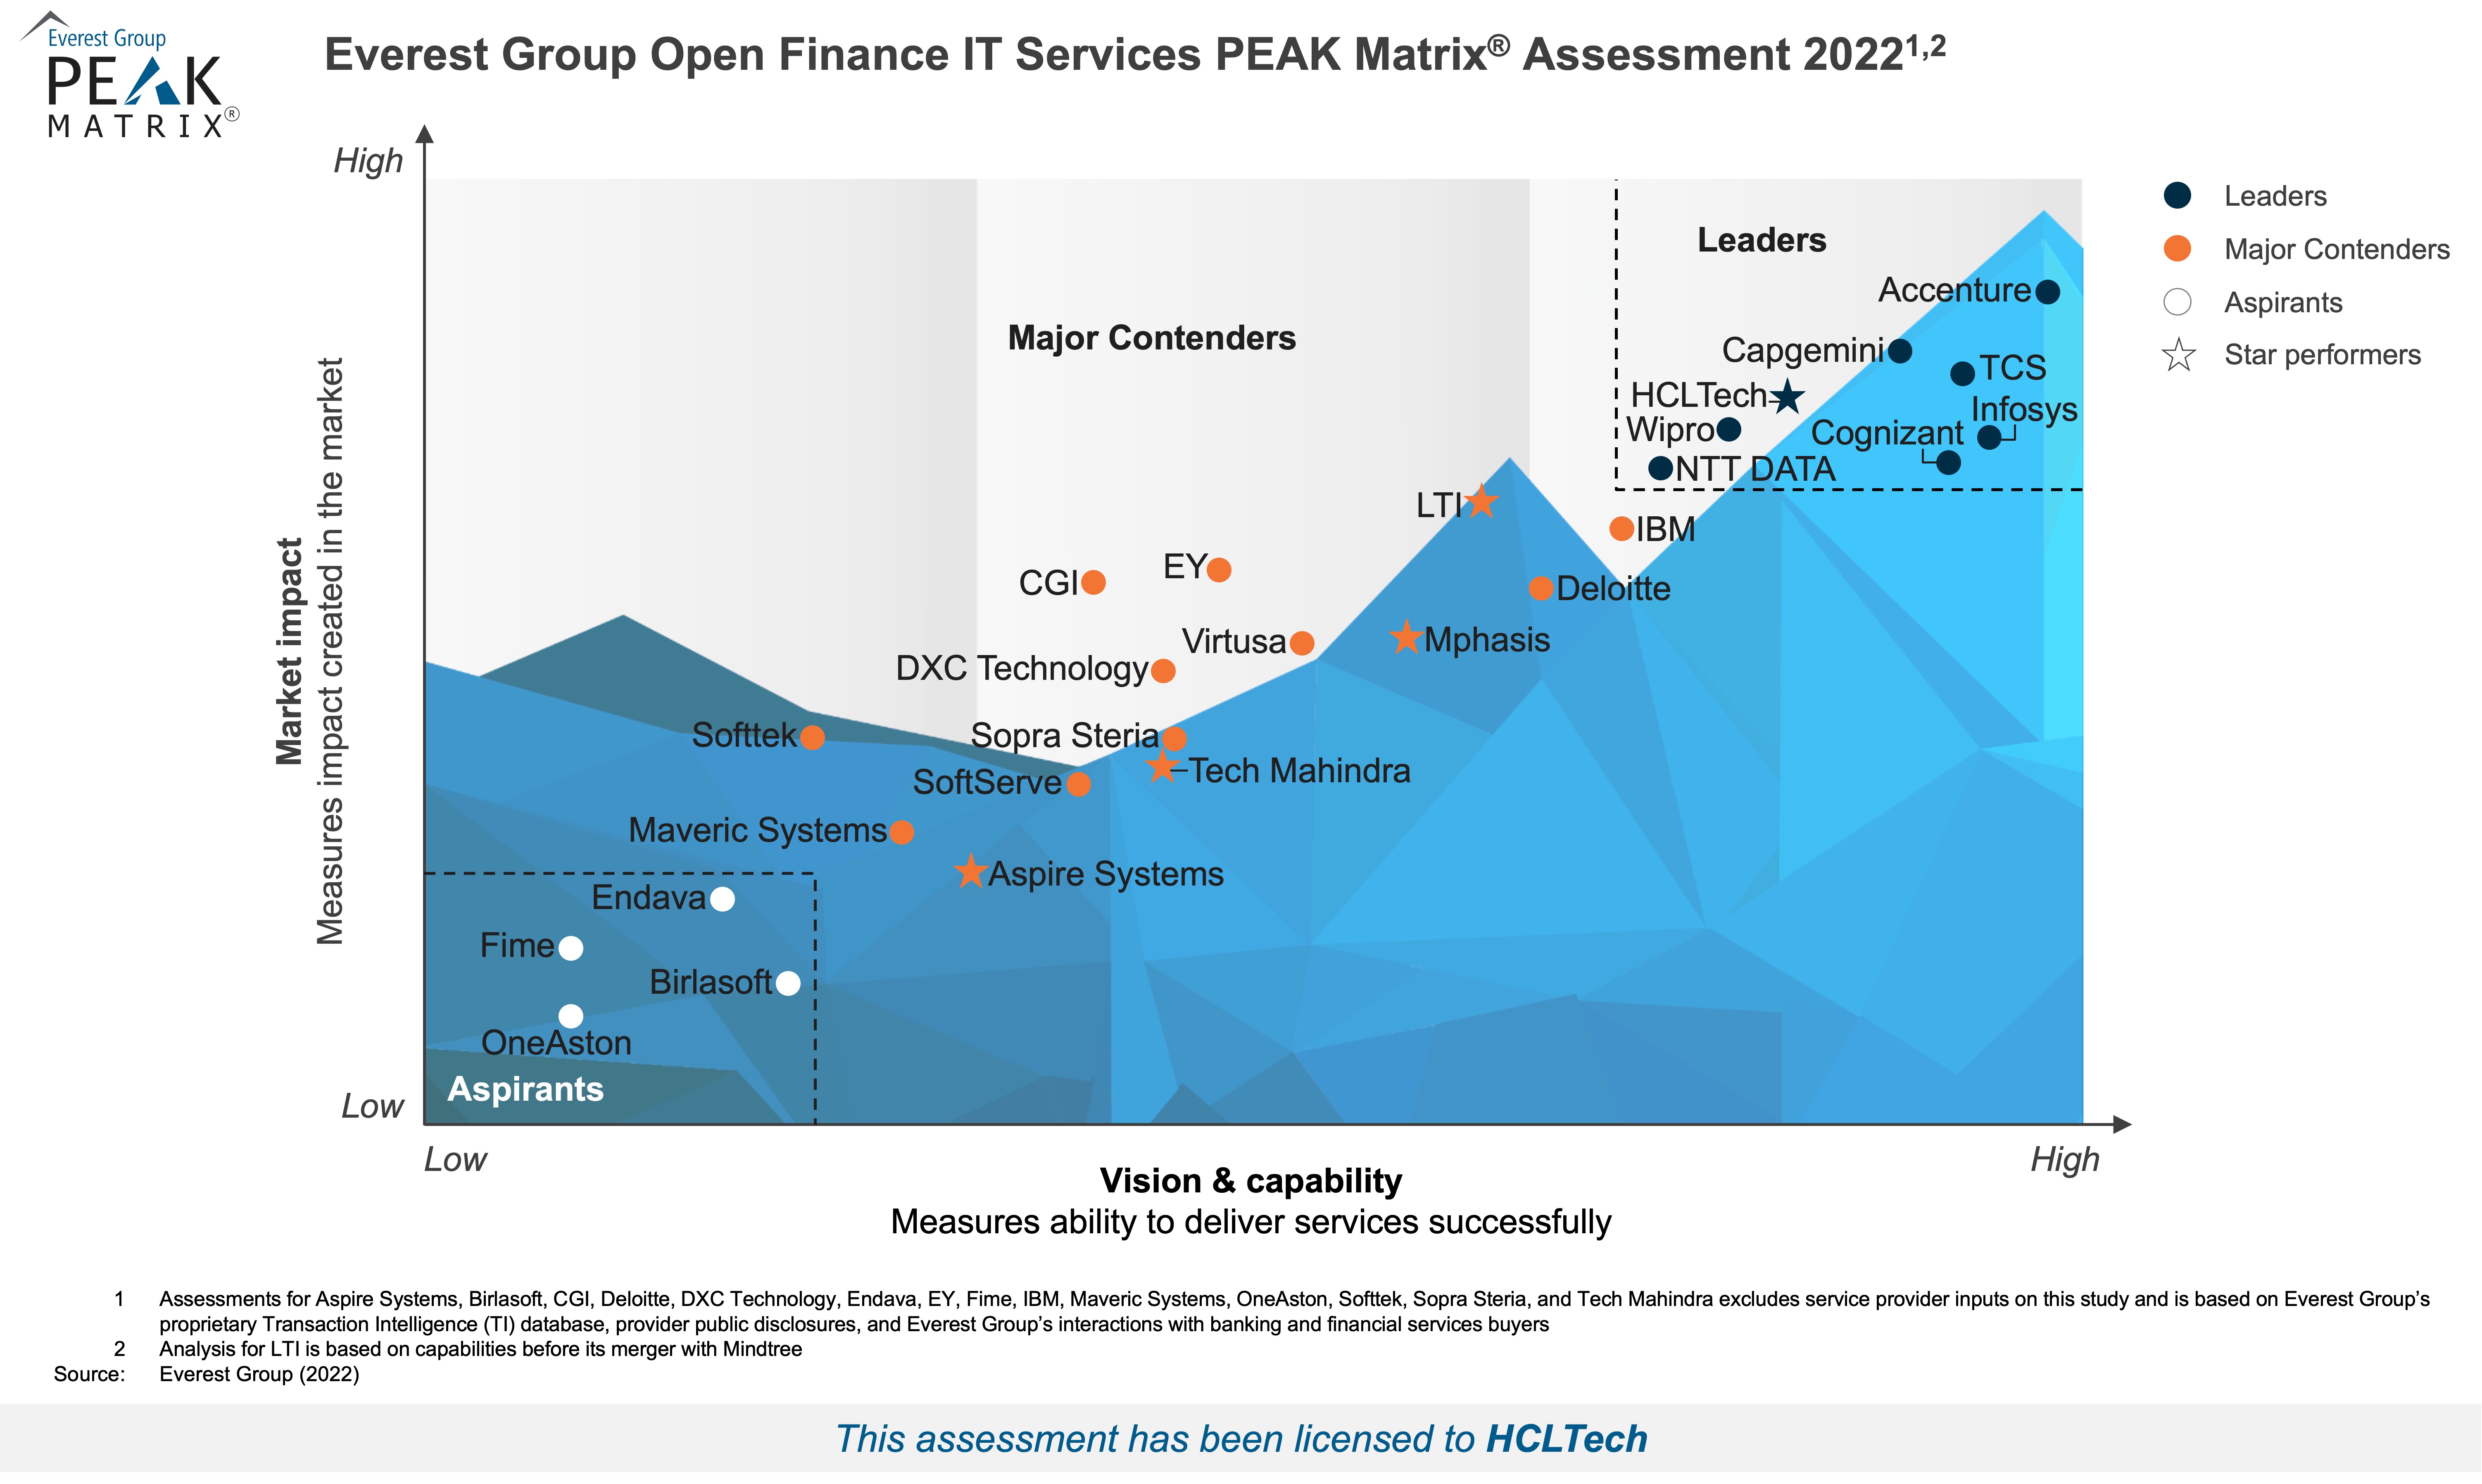 HCLTech Positioned As A Leader And Star Performer In Everest Group’s Open Finance IT Services PEAK Matrix® Assessment 2022